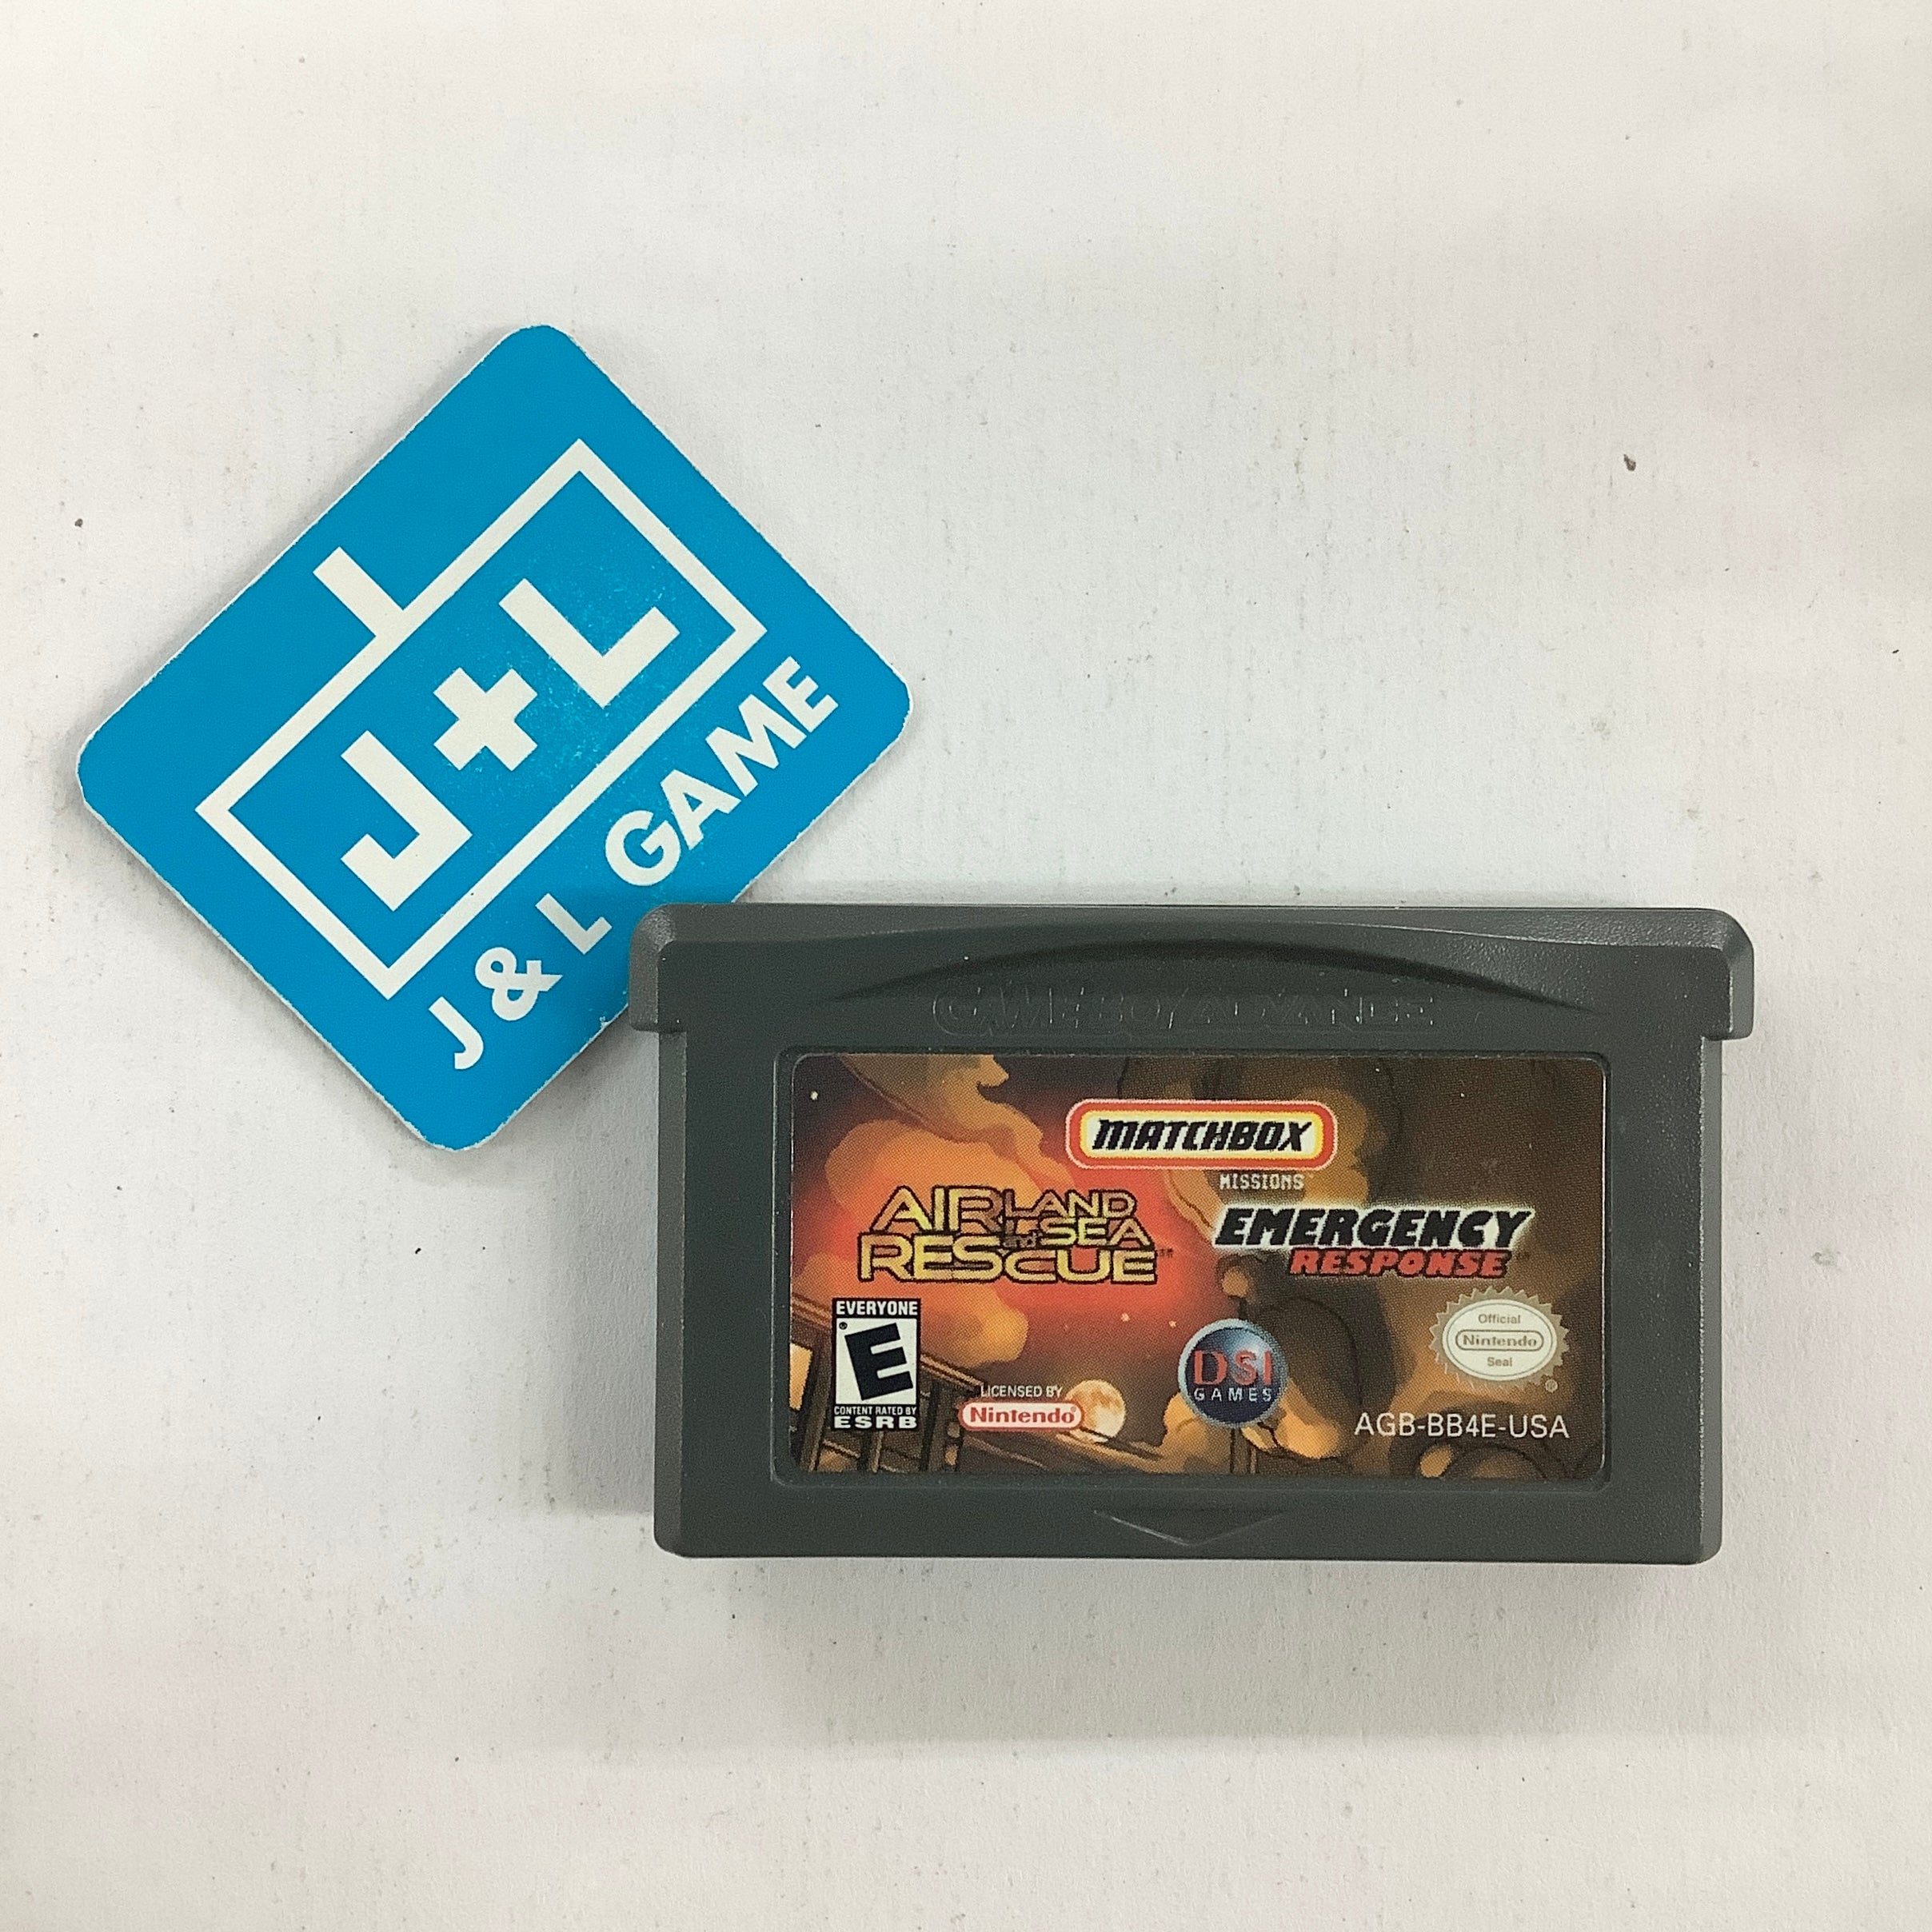 Matchbox Missions: Air, Land and Sea Rescue / Emergency Response - (GBA) Game Boy Advance [Pre-Owned] Video Games DSI Games   